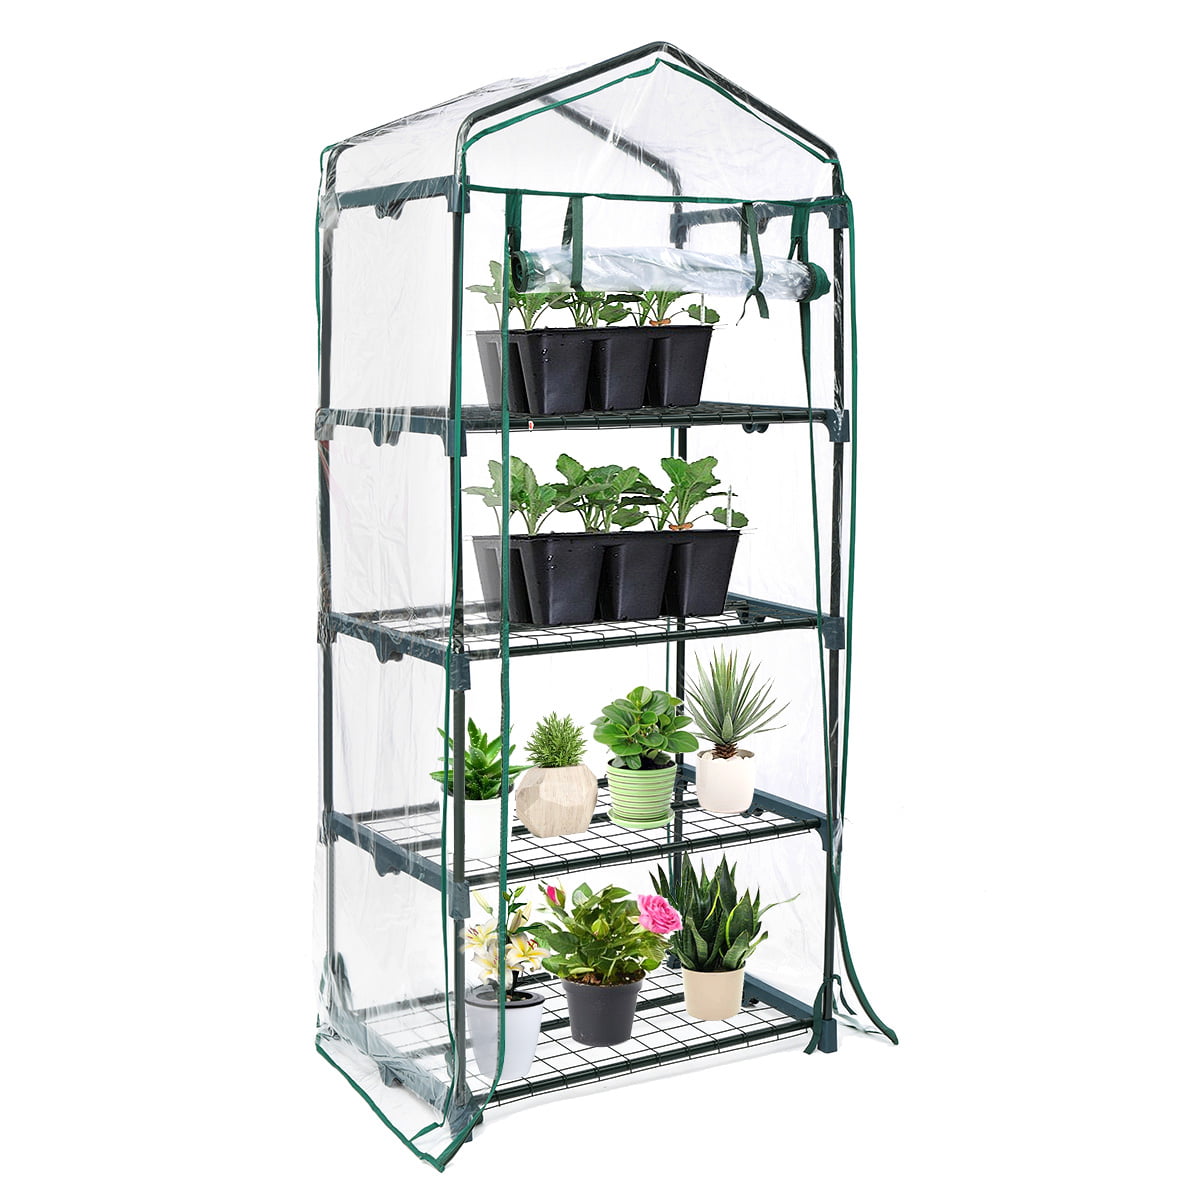 New 4 Tier Greenhouse Portable Four Shelf Roll Up Front Panel With PVC Cover 